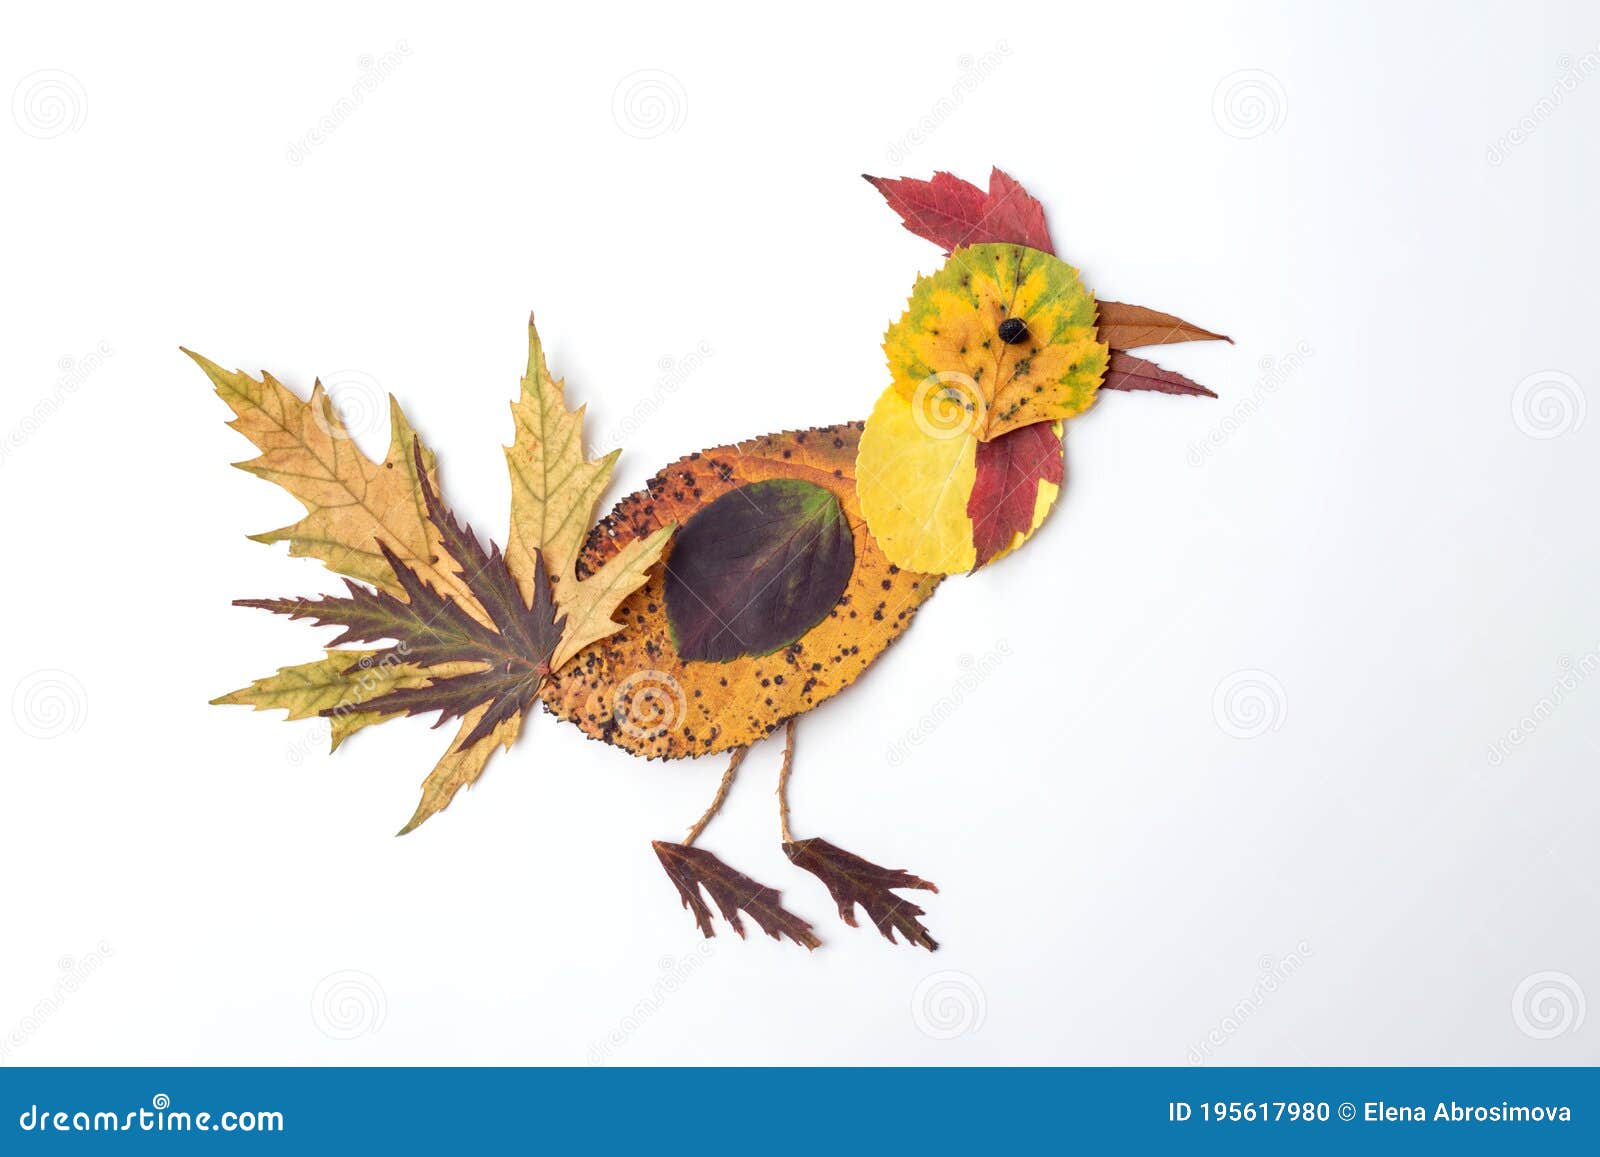 Autumn Nature Craft for Kids, Bird Made of Dry Leaf Stock Photo - Image of  abstract, handmade: 195617980